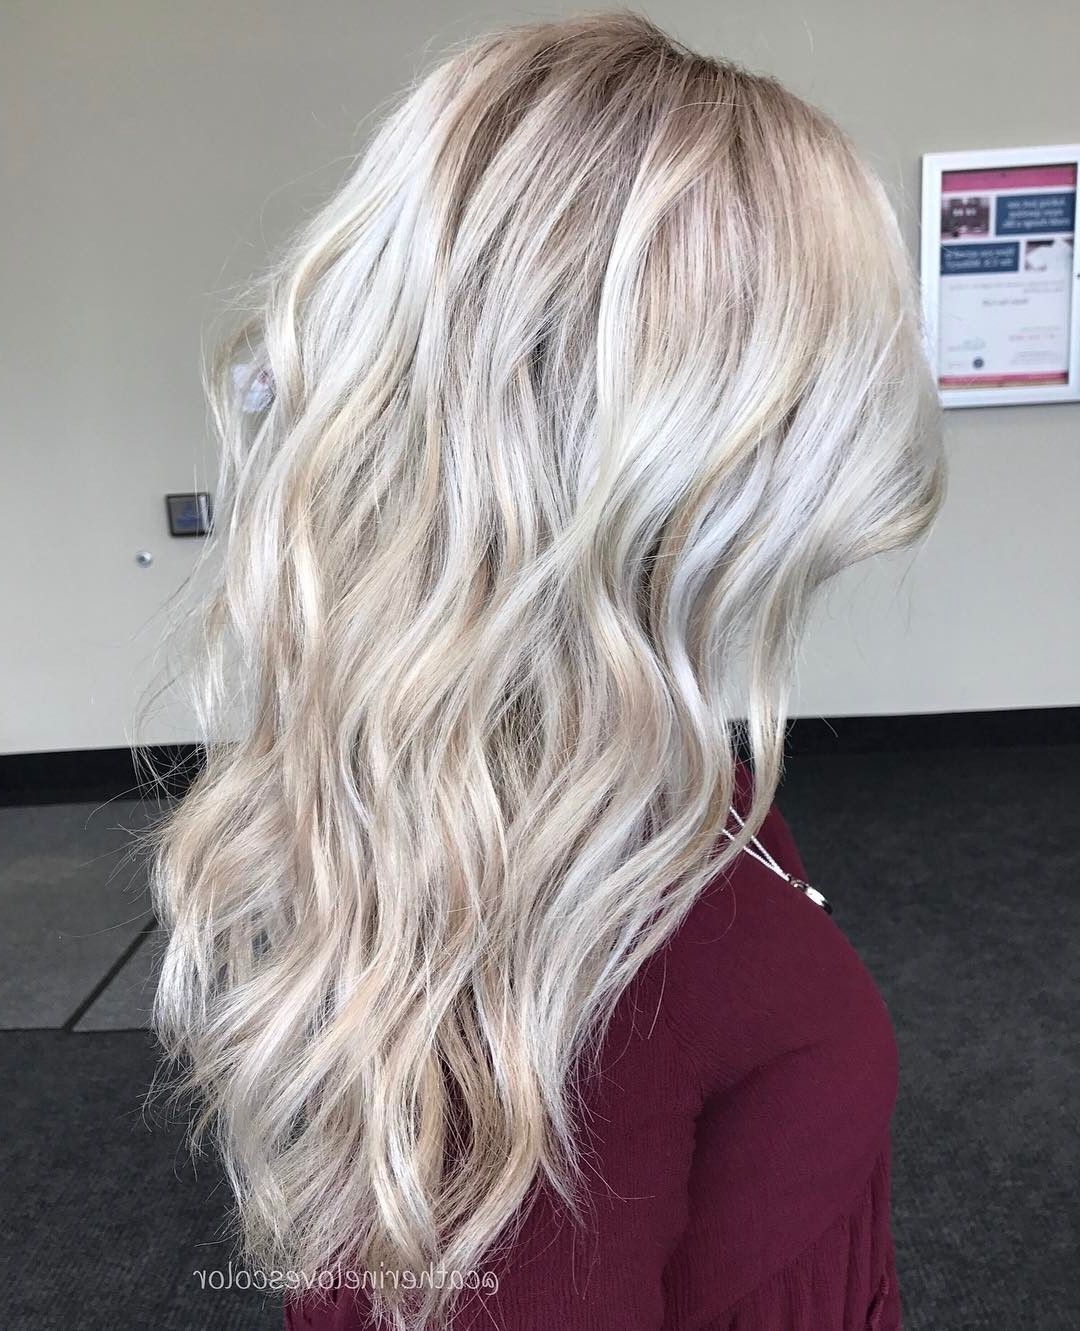 Fashionable Sleek Ash Blonde Hairstyles Intended For 20 Adorable Ash Blonde Hairstyles To Try: Hair Color Ideas  (View 2 of 20)